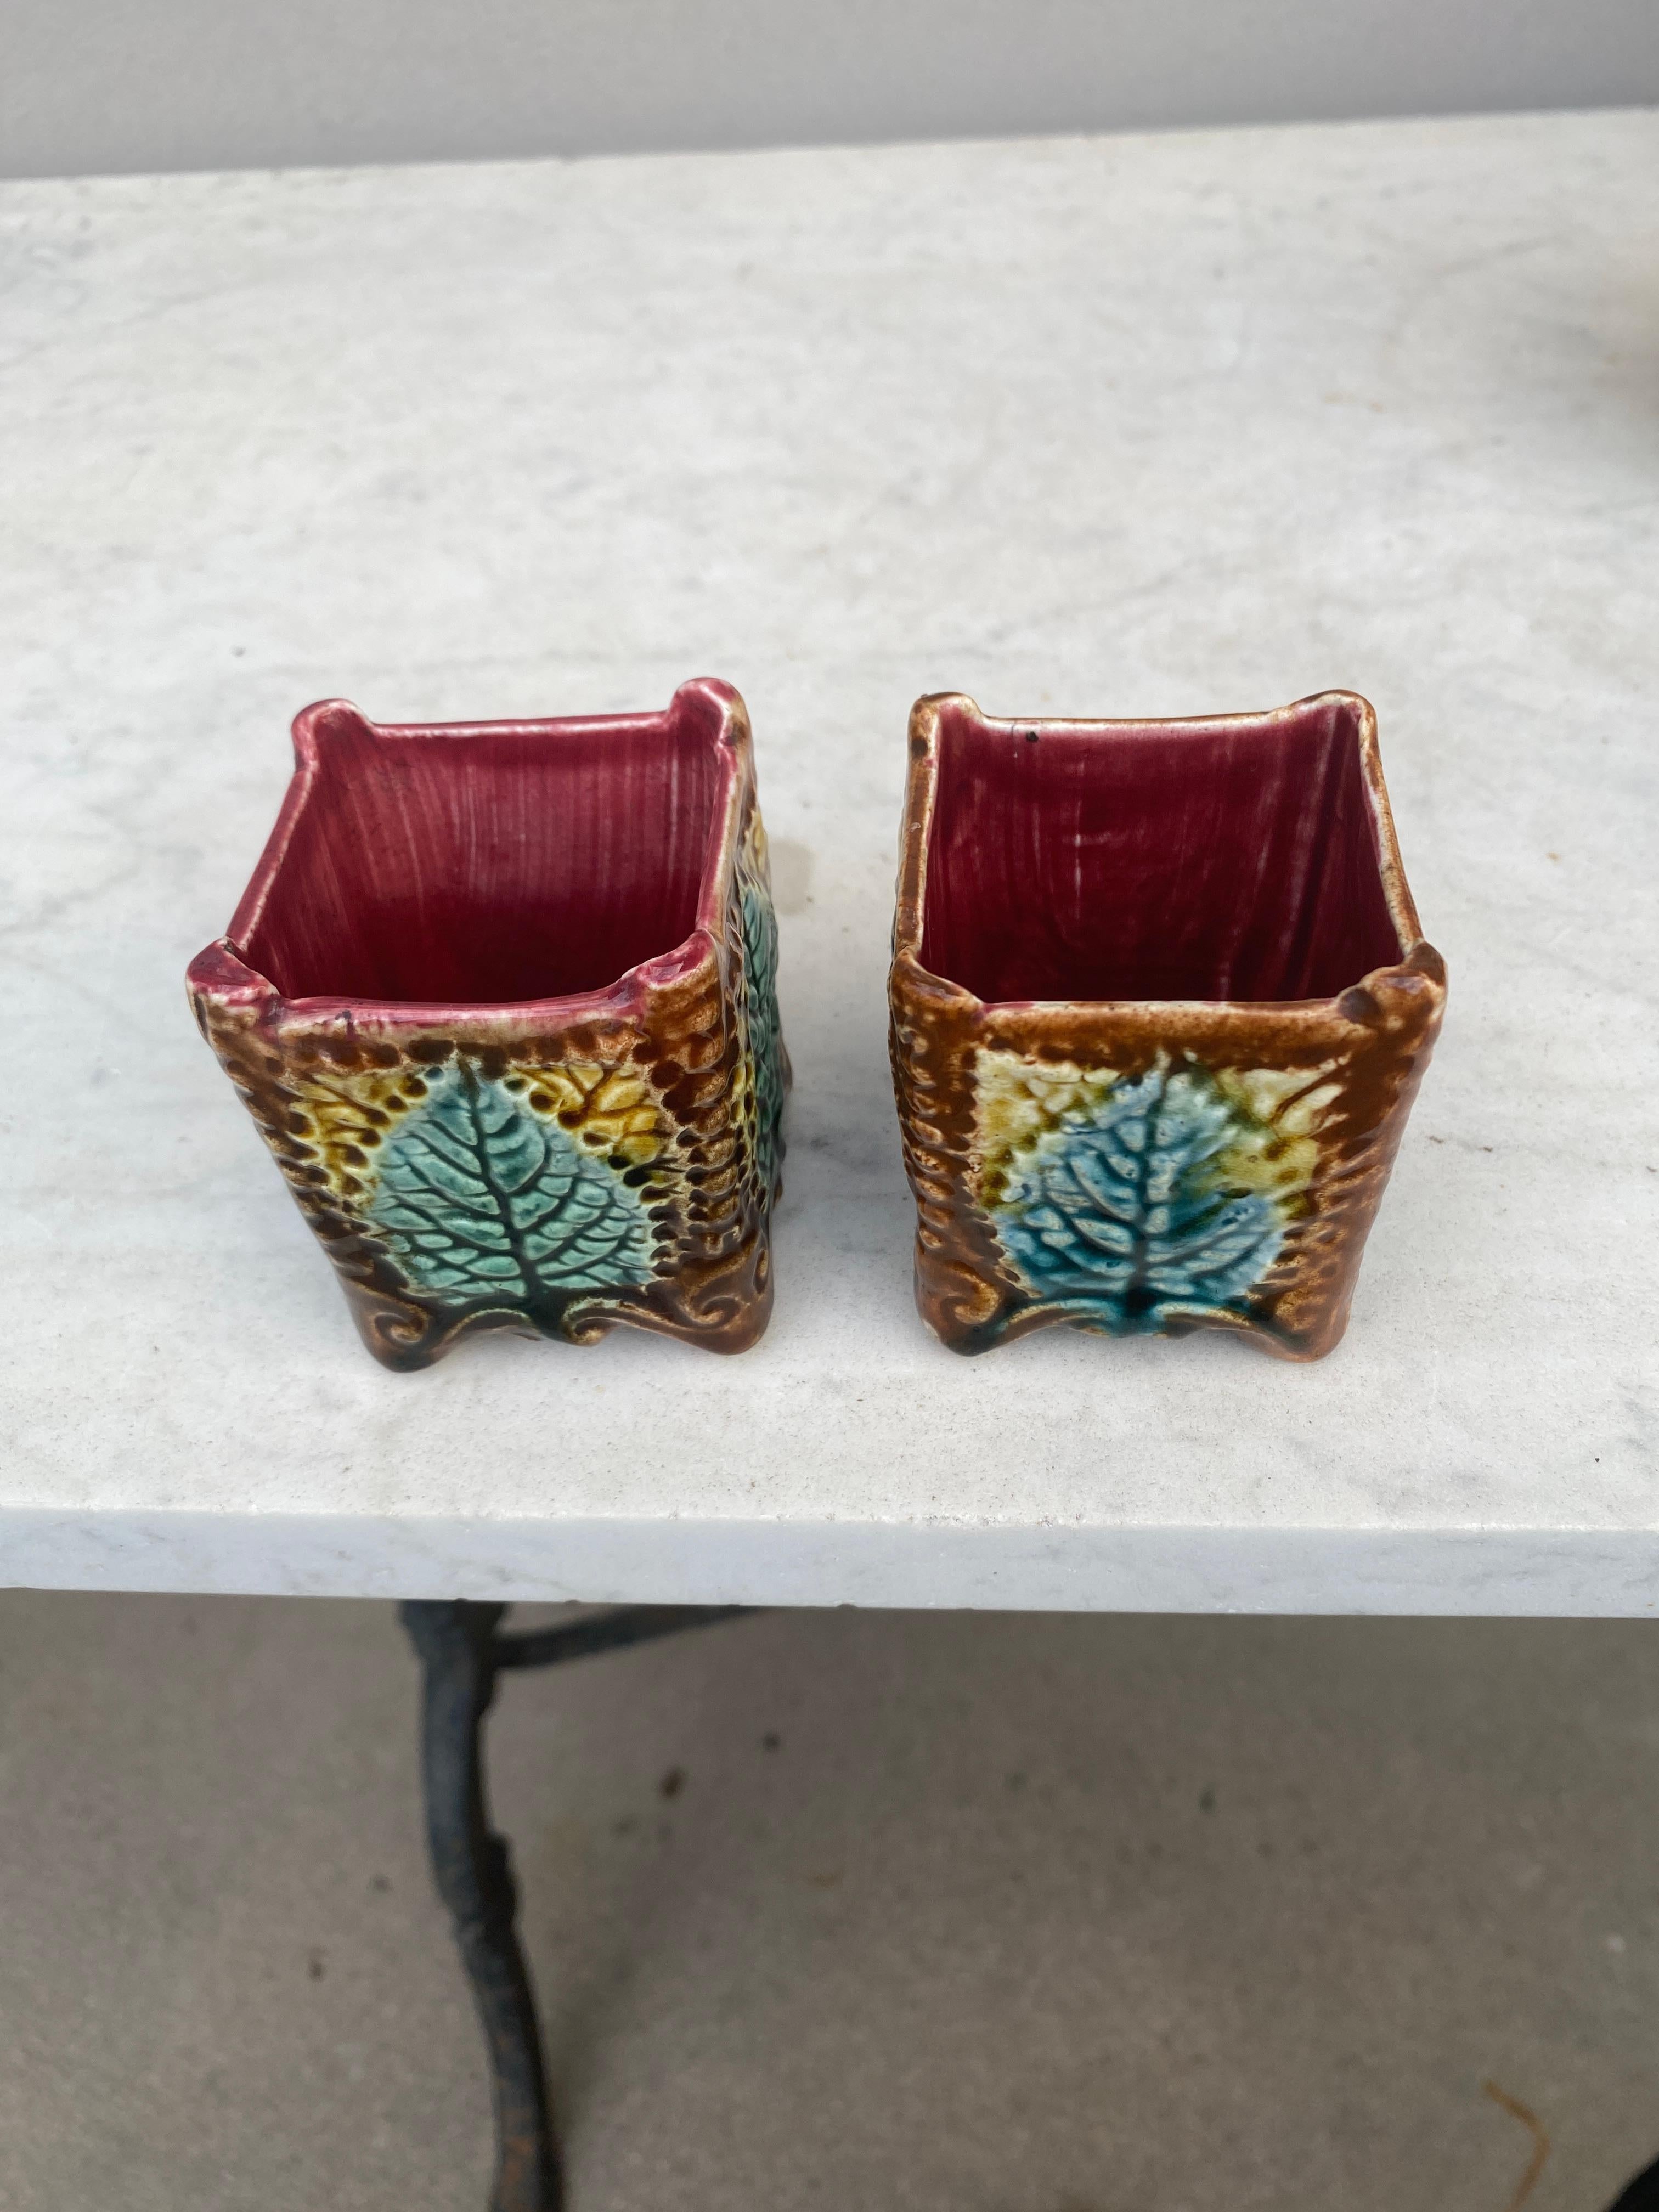 Small pair of French Majolica Cache pot, circa 1890.
Decorated with leaves.